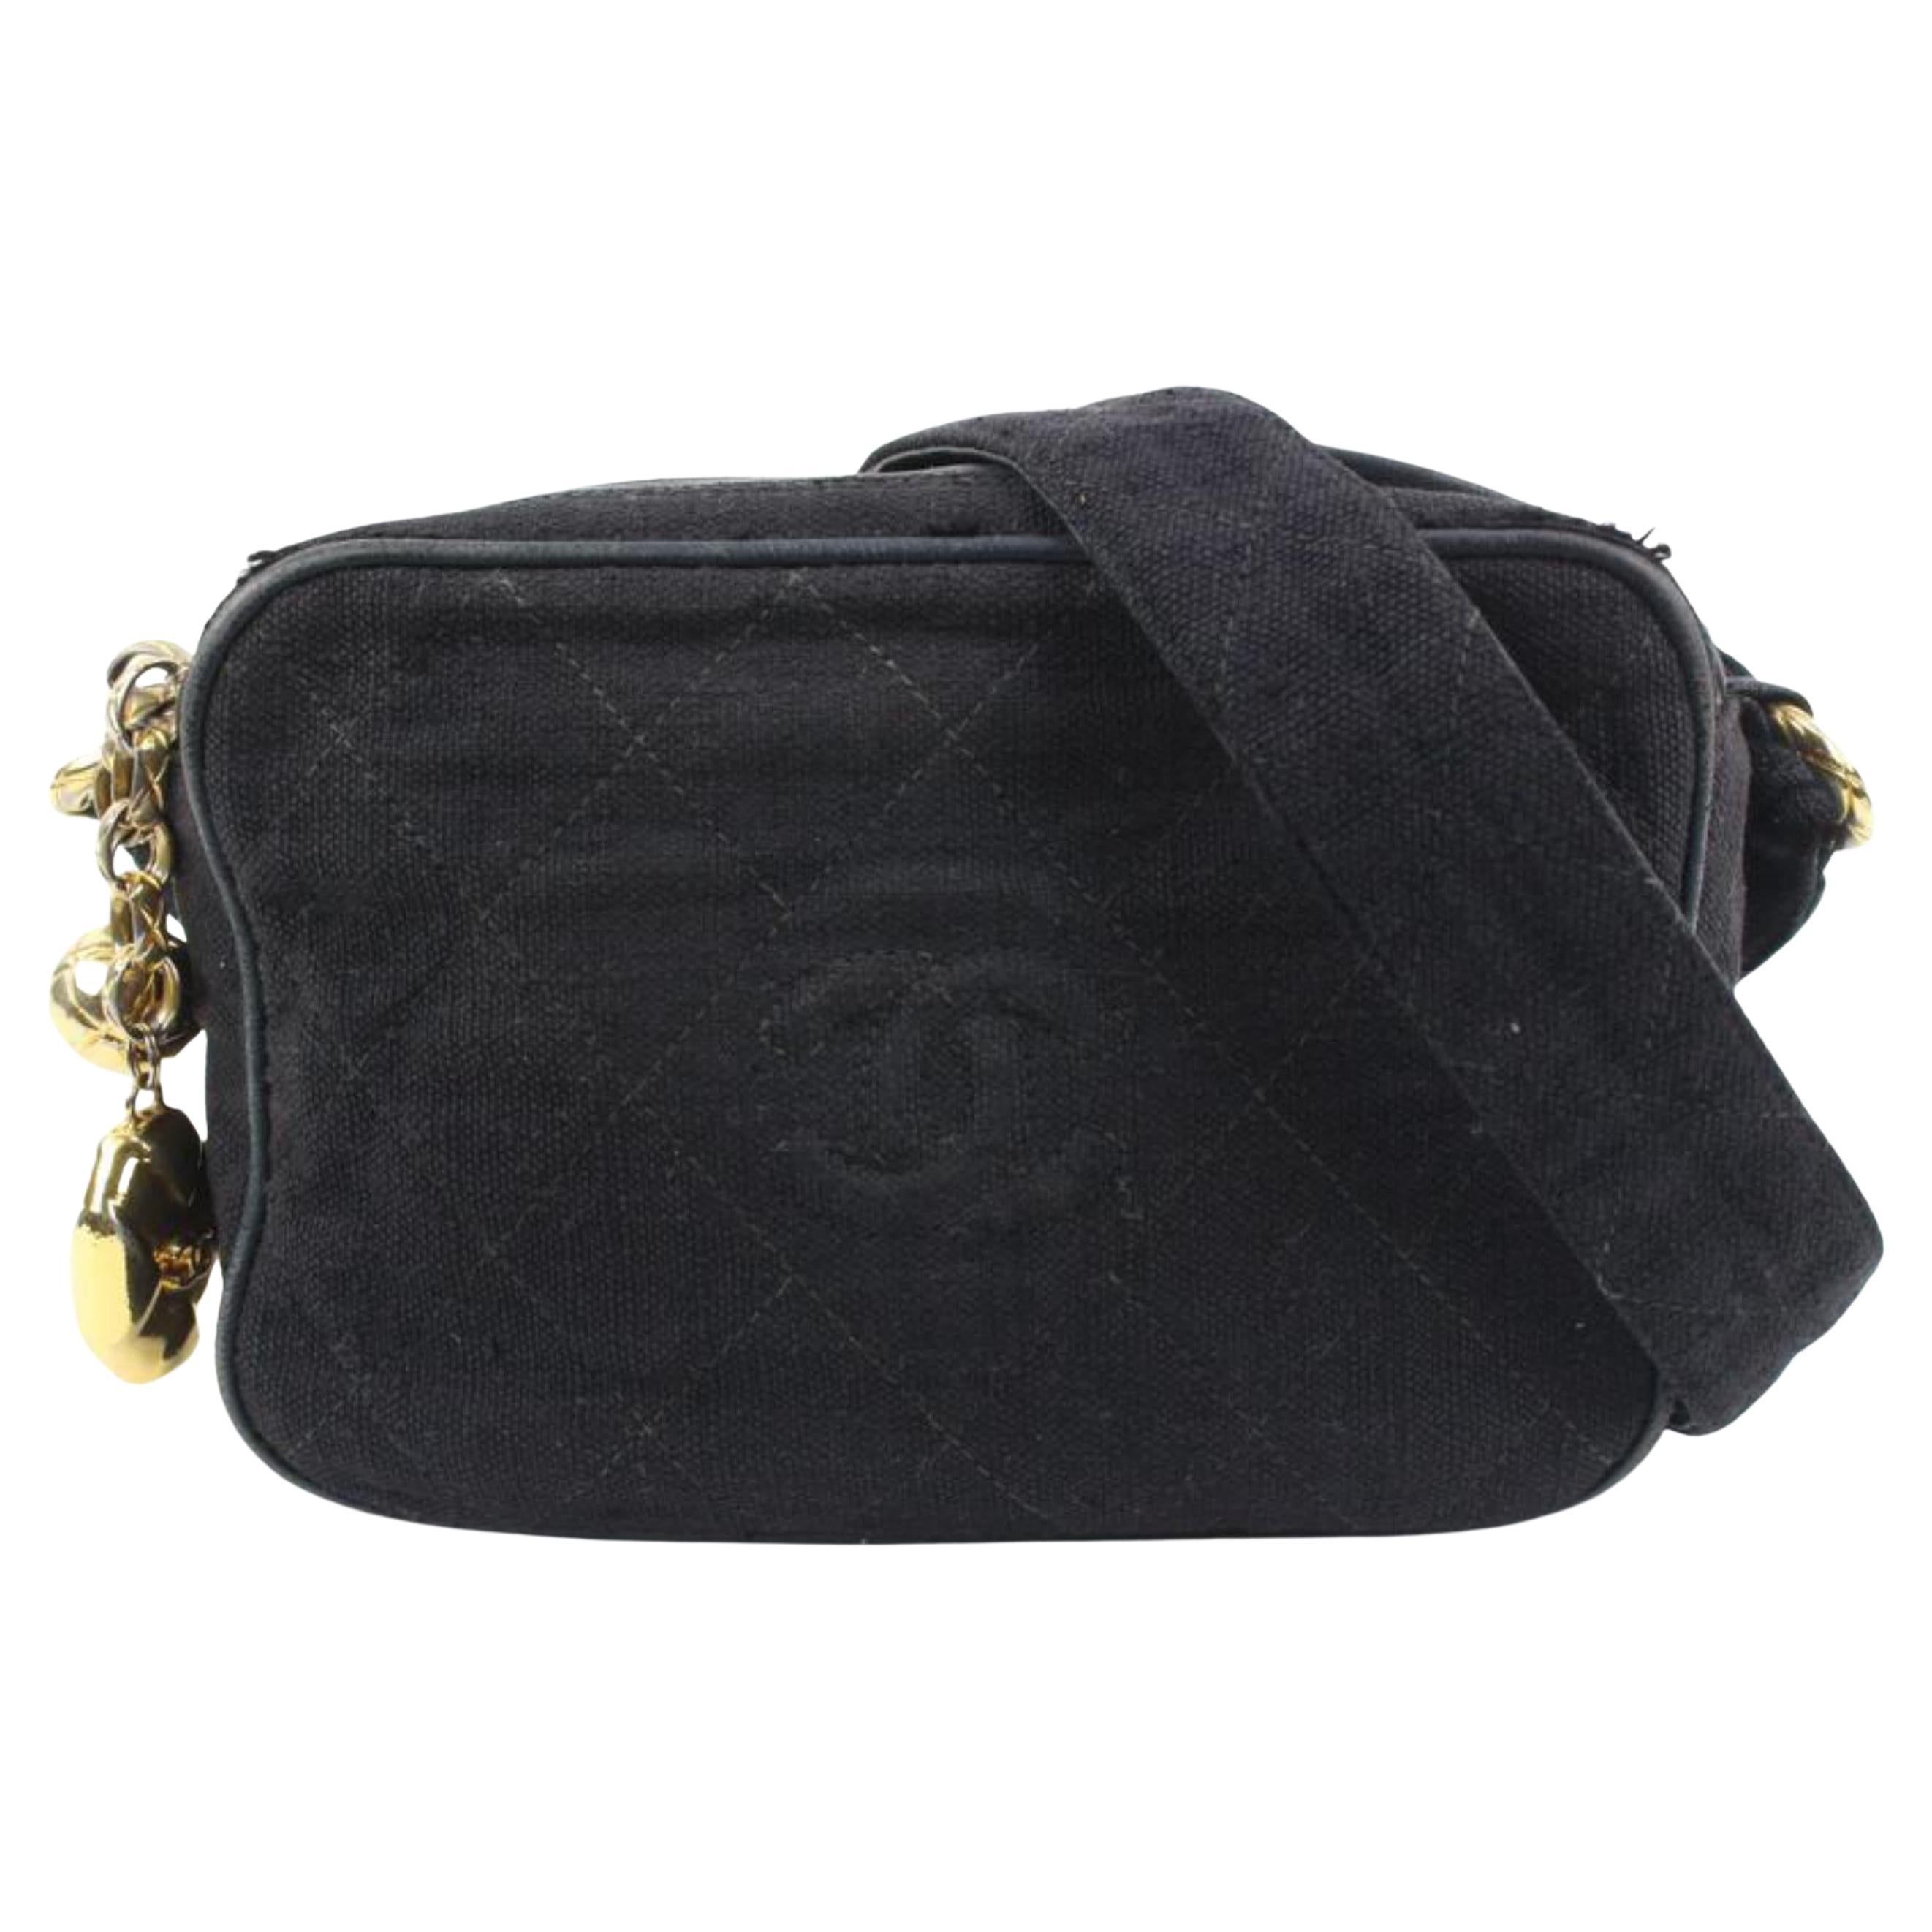 Chanel Ultra Rare Black Woven Gold Charm Camera Bag 57ck32s For Sale